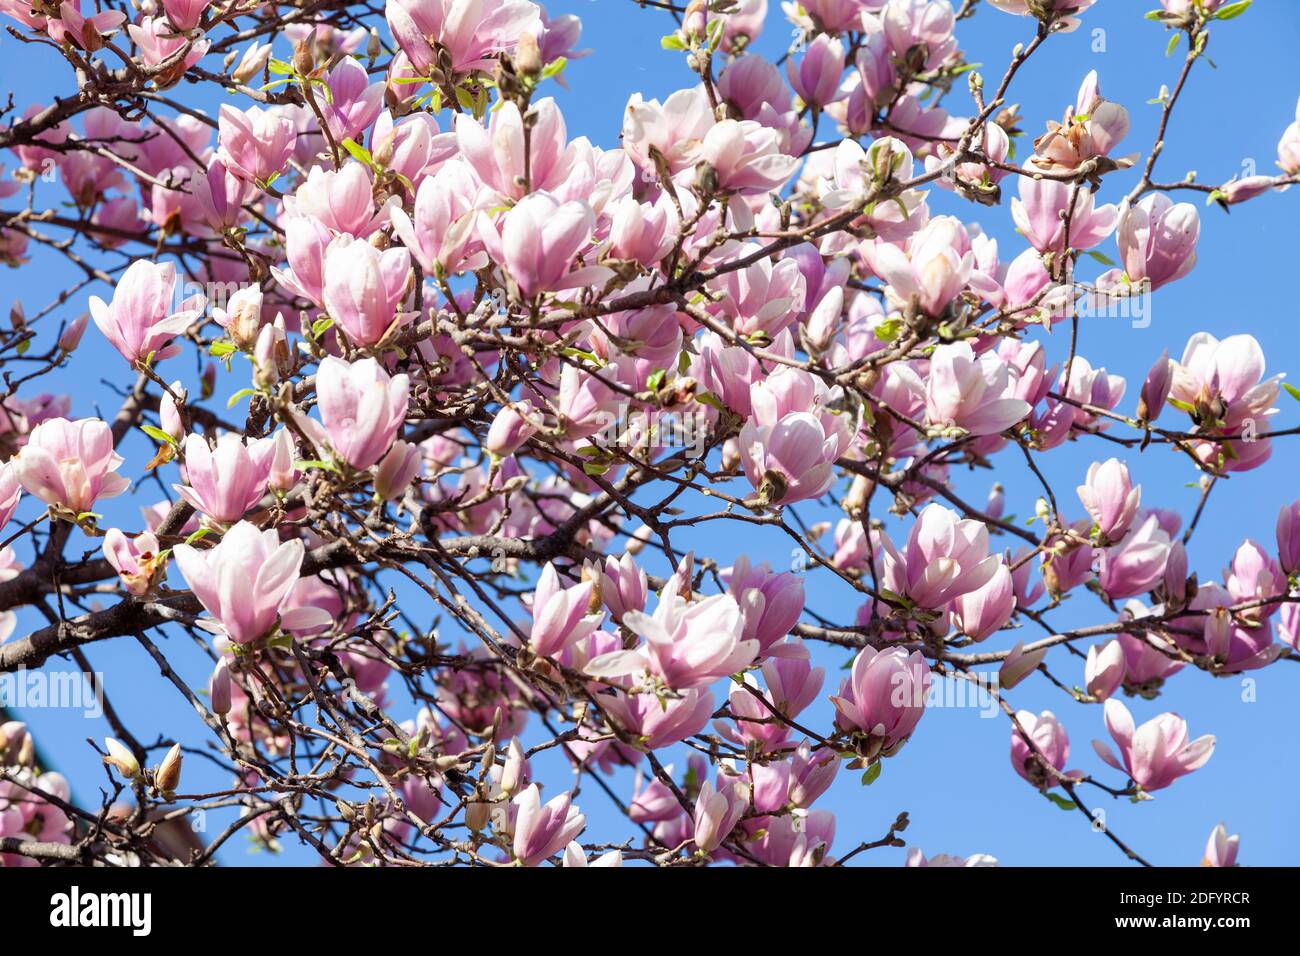 close up of a Magnolia tree with beautiful pink flowers Stock Photo